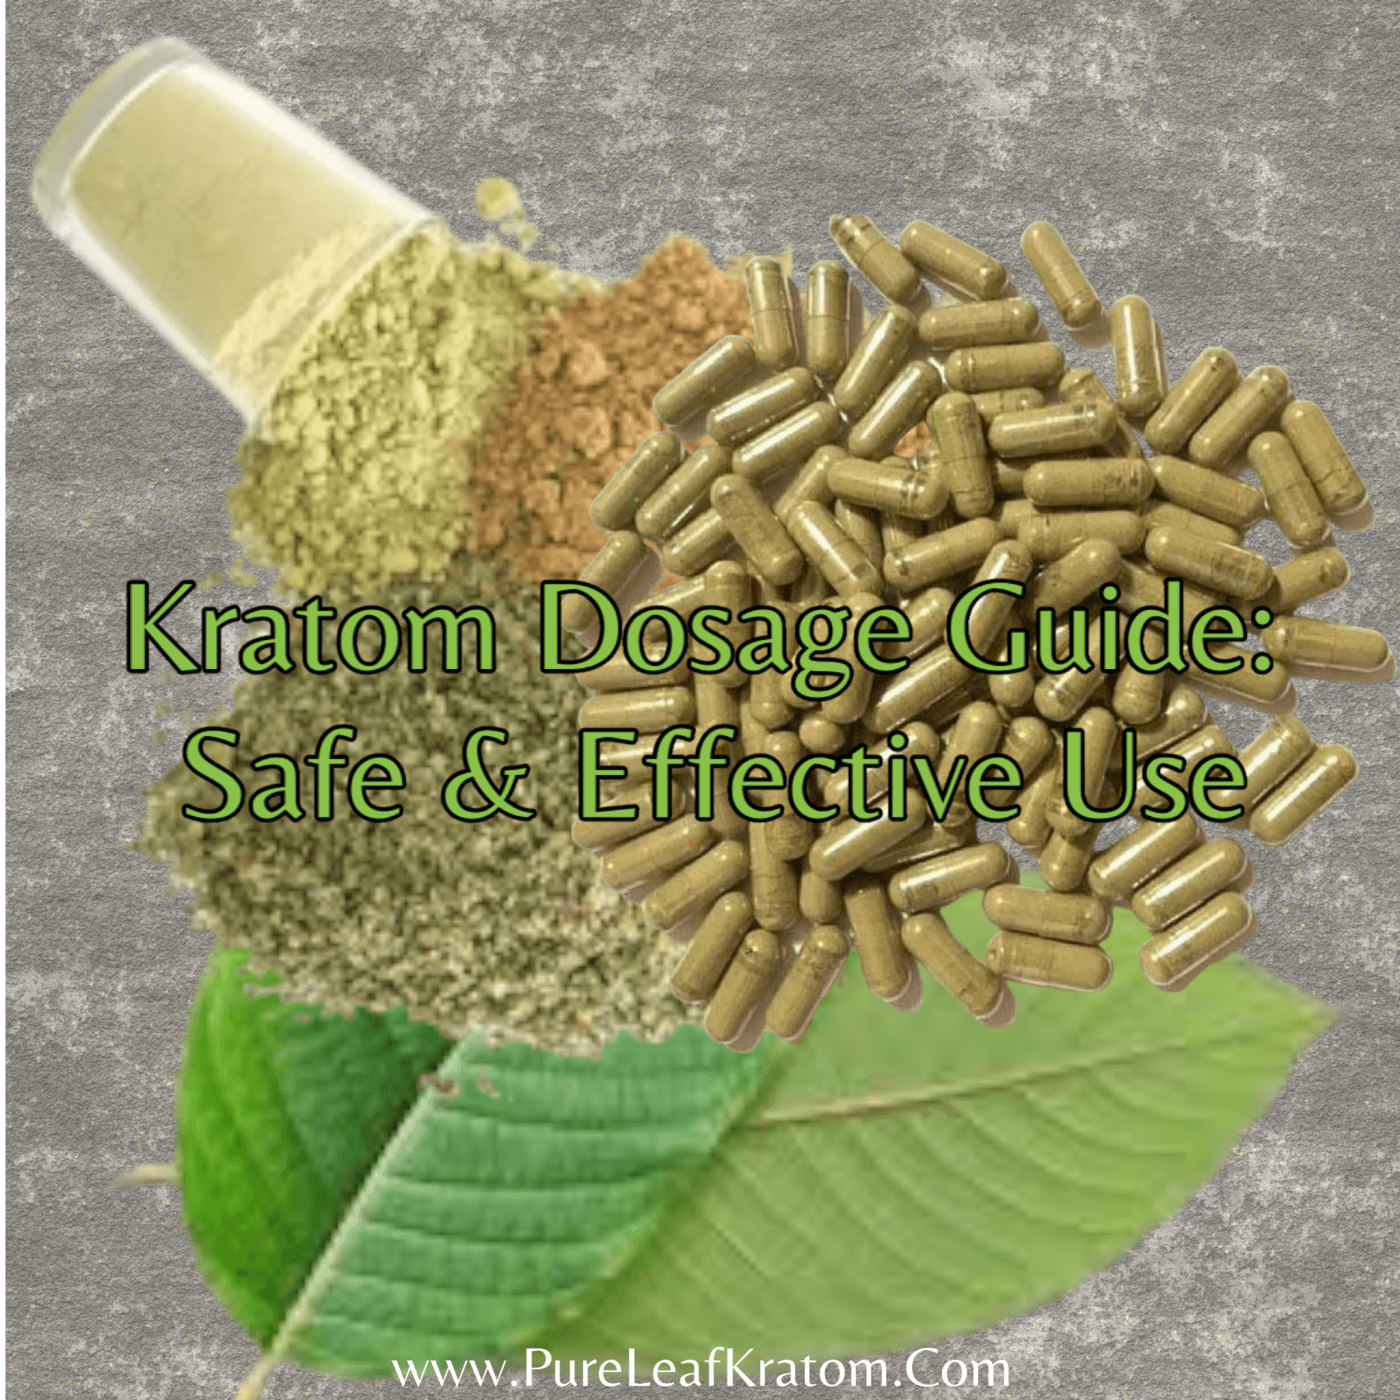 How Much Kratom Should I Take? A Guide on Recommended Kratom Dosages